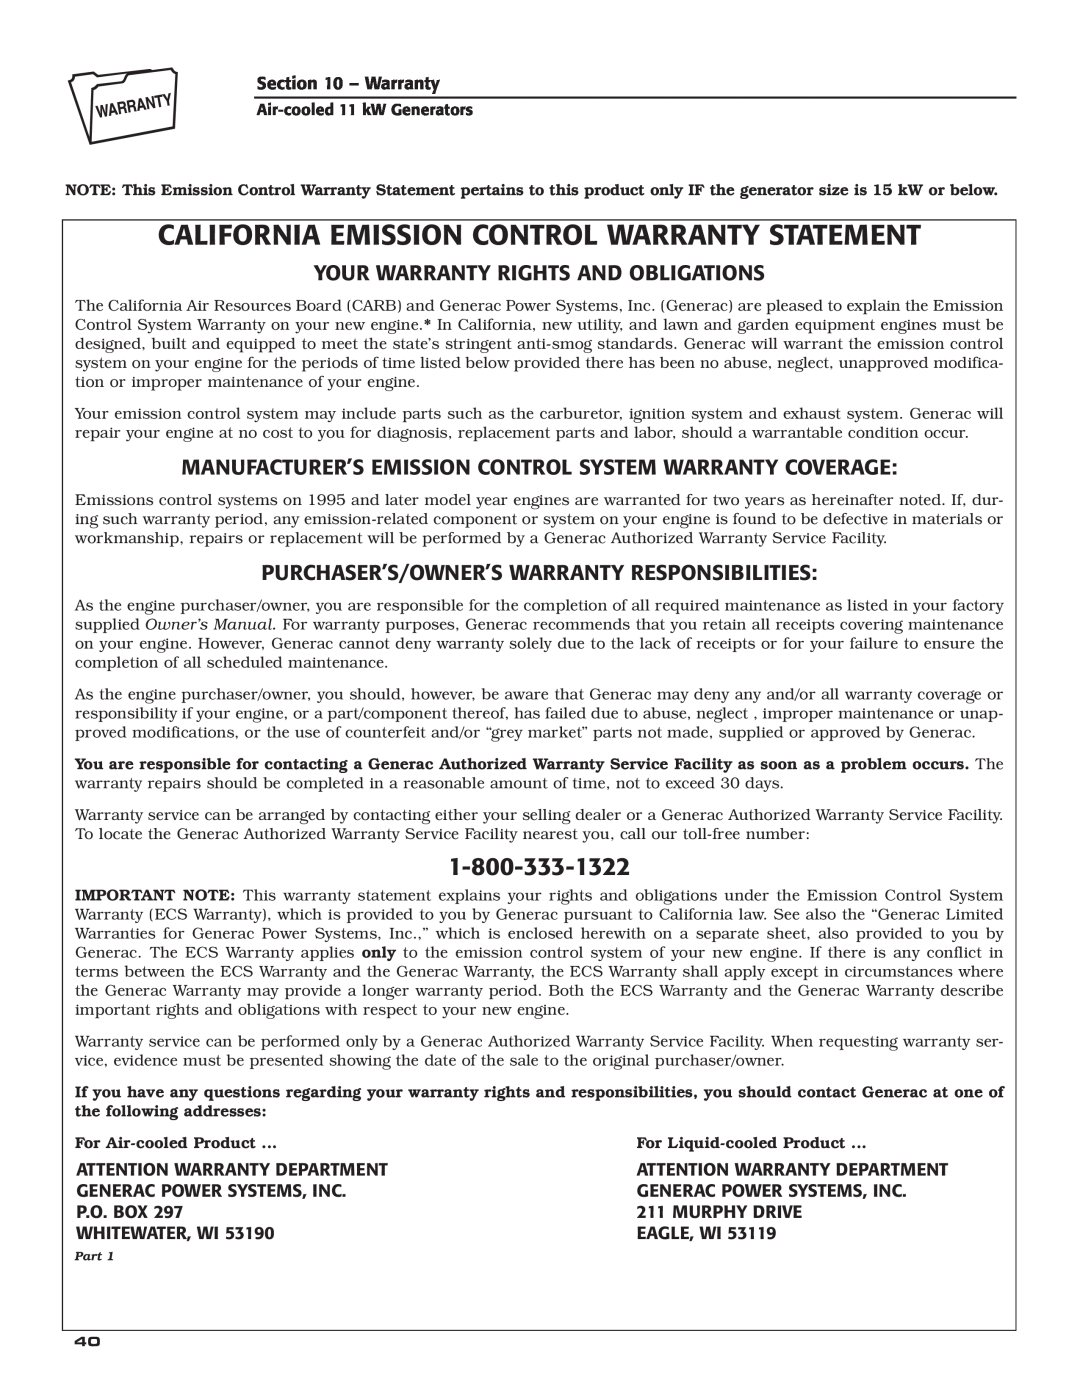 Generac Power Systems 004916-0 California Emission Control Warranty Statement, Your Warranty Rights And Obligations 